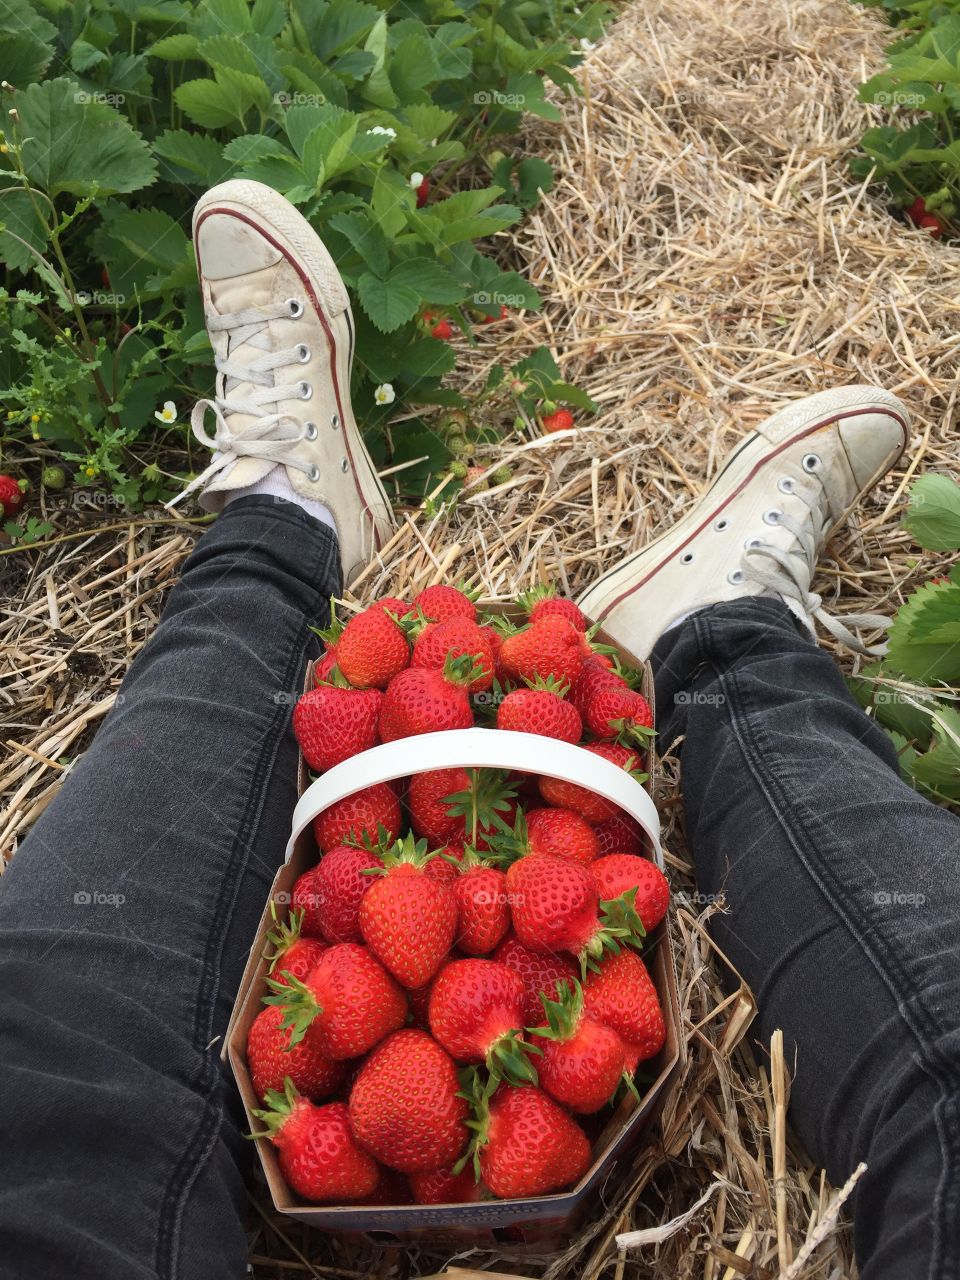 Finding all the perfect strawberries 
